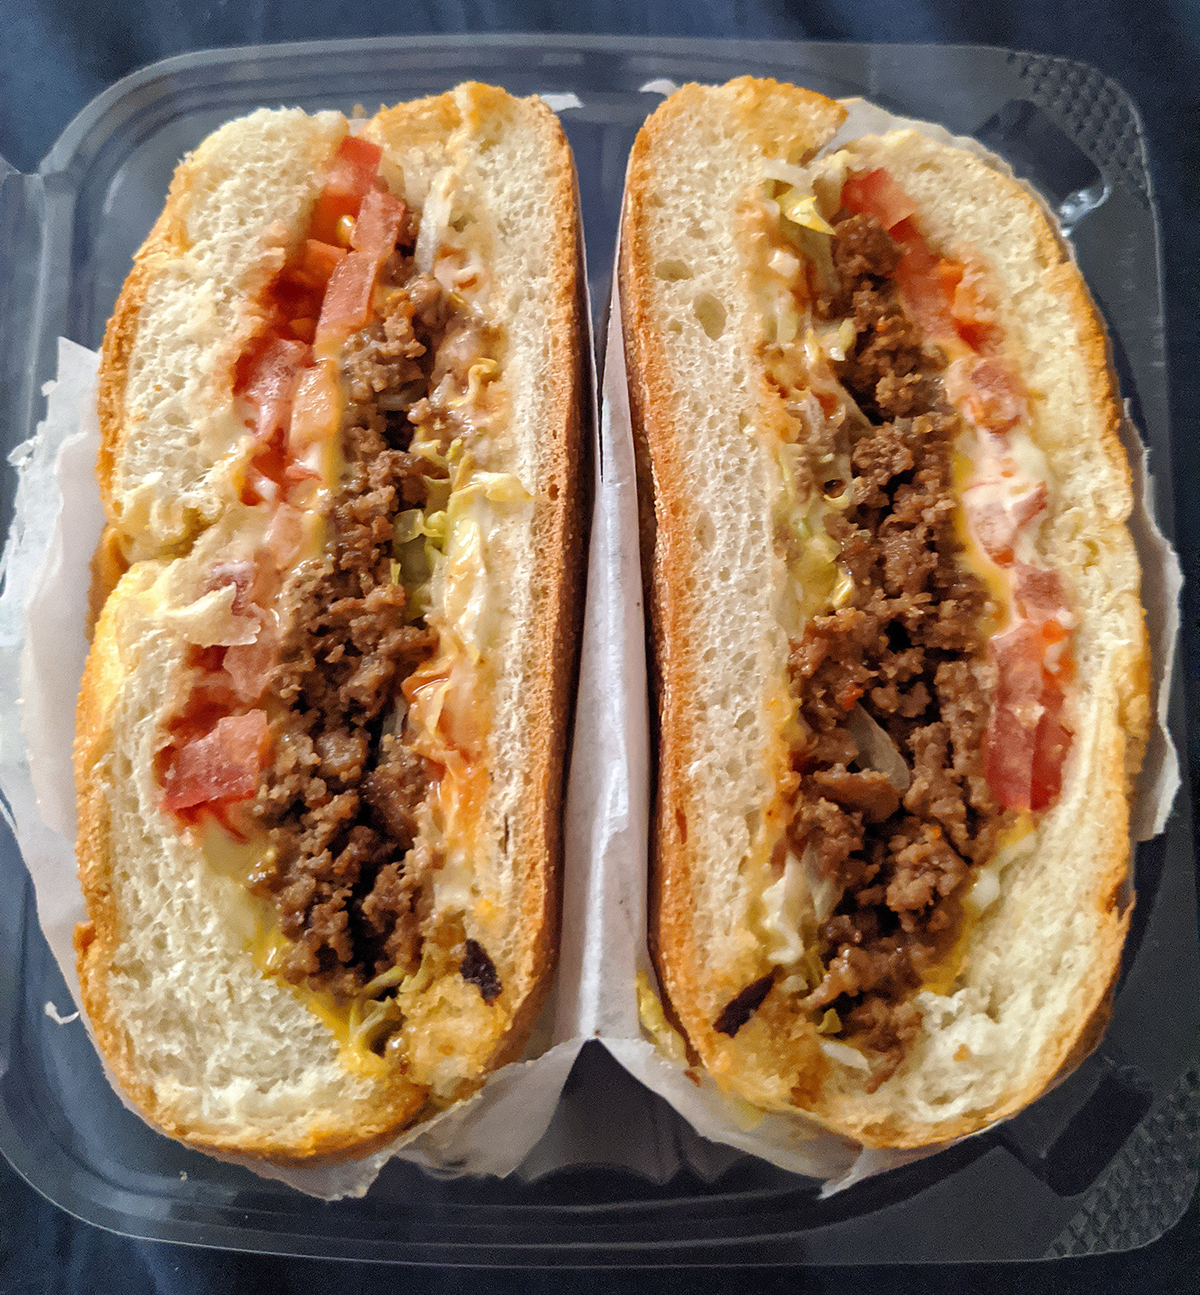 Chopped cheese sandwich from a NYC bodega